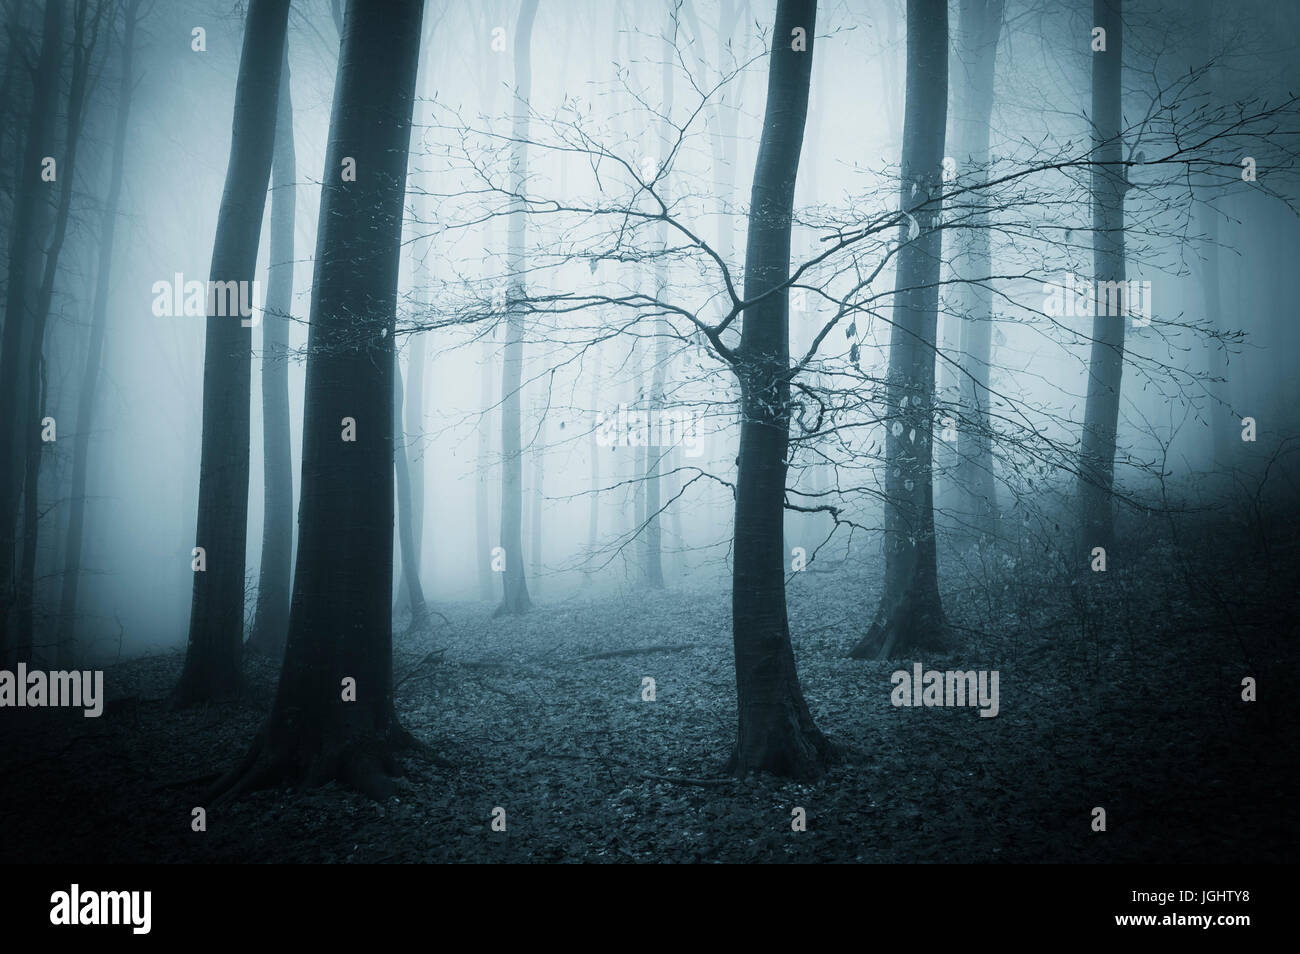 tree in dark scary forest landscape with fog Stock Photo